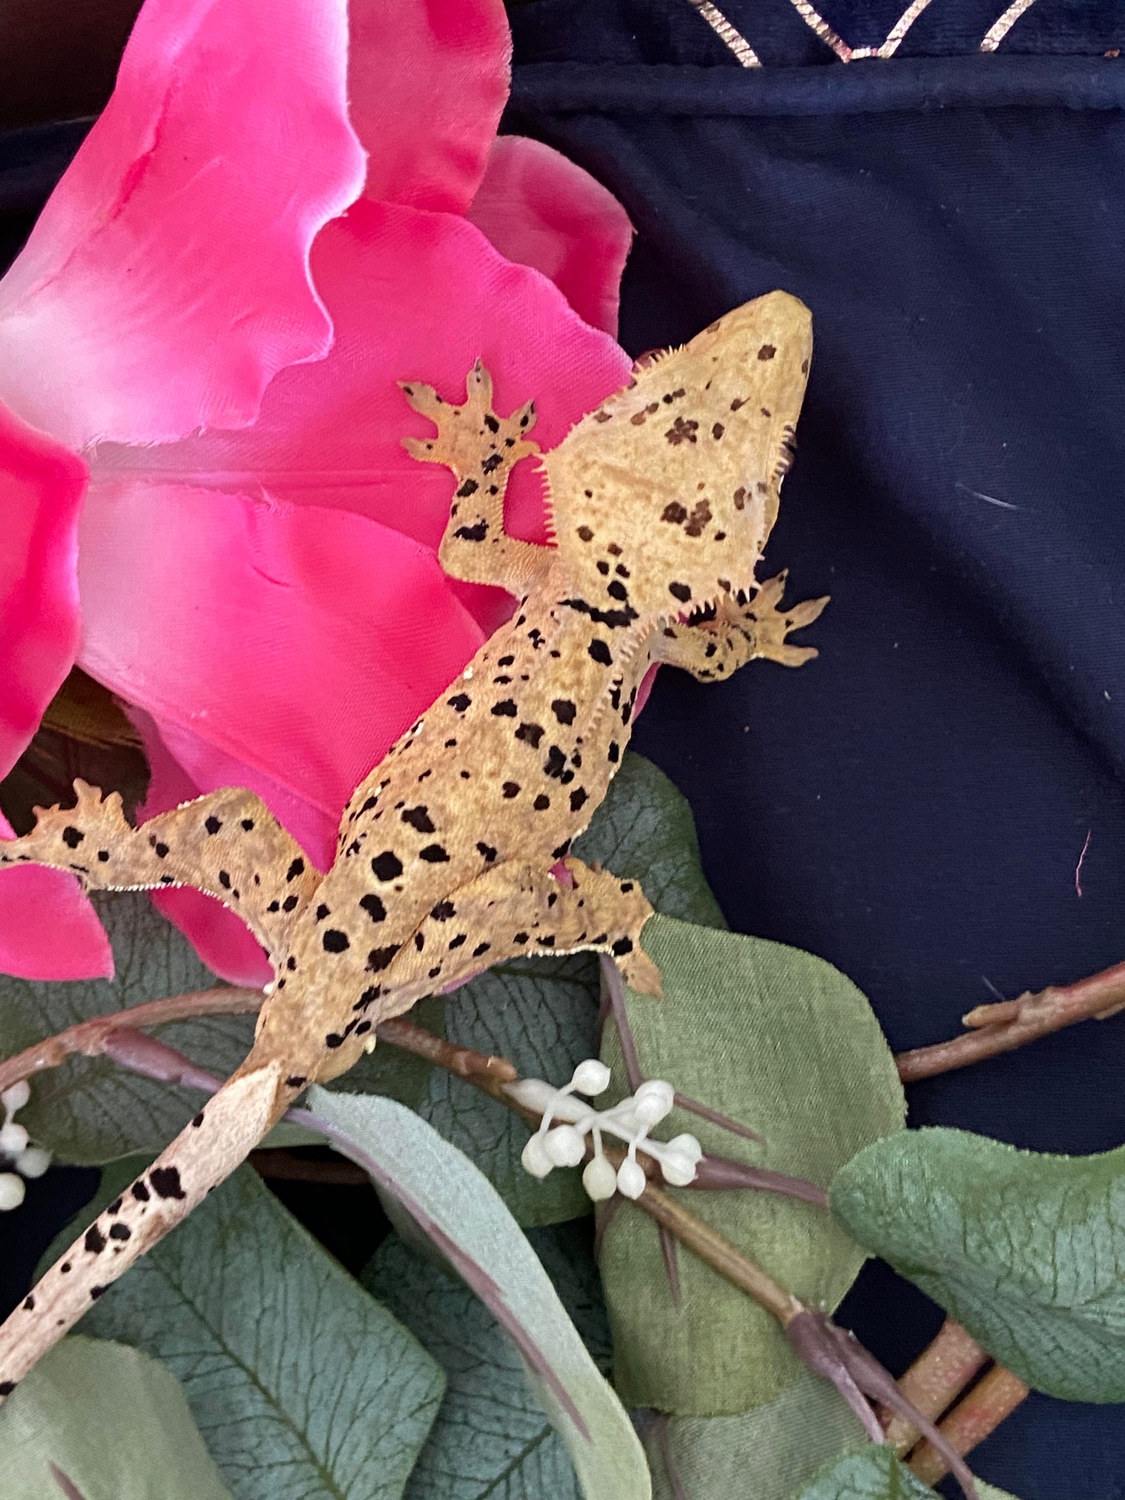 Super Dal Crested Gecko by Supernova Cresties